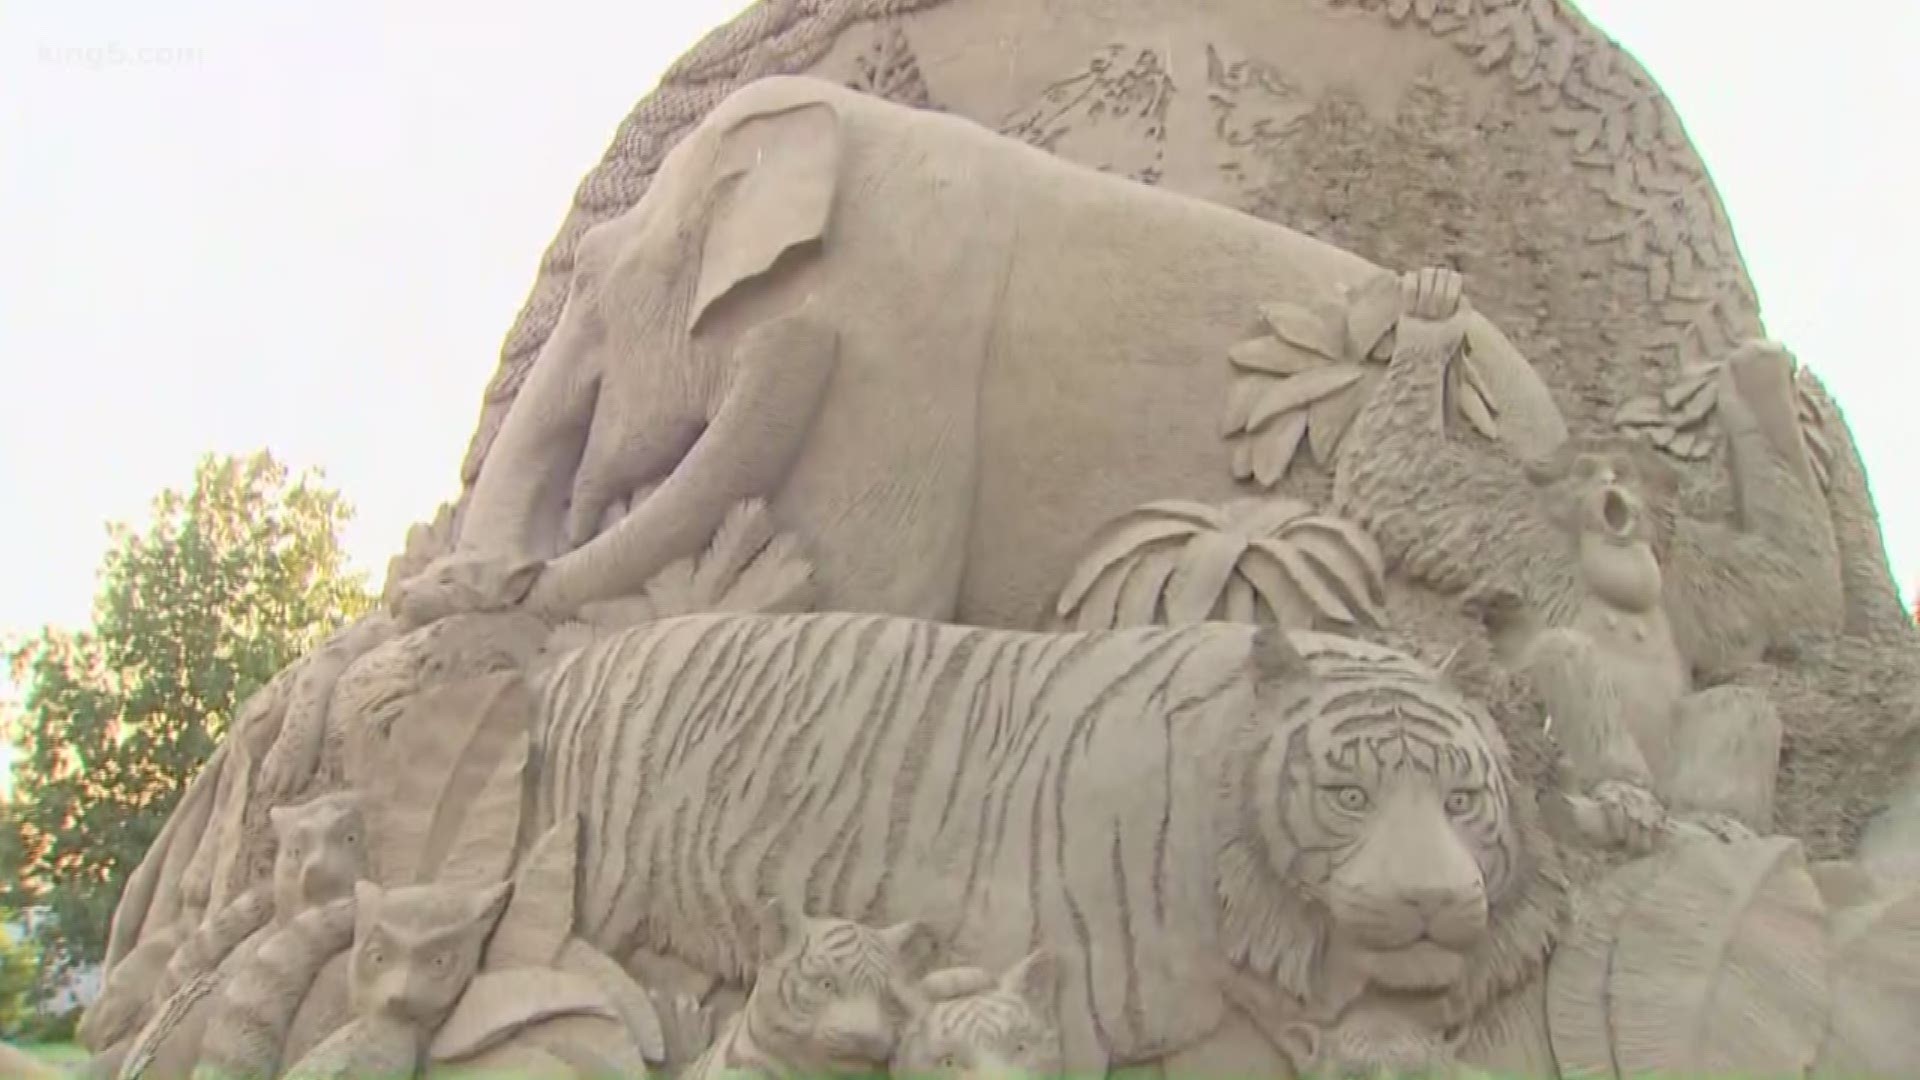 Sue McGrew, a Tacoma native who travels the world creating art out of sand, is working on a special piece at the Point Defiance Zoo and Aquarium.